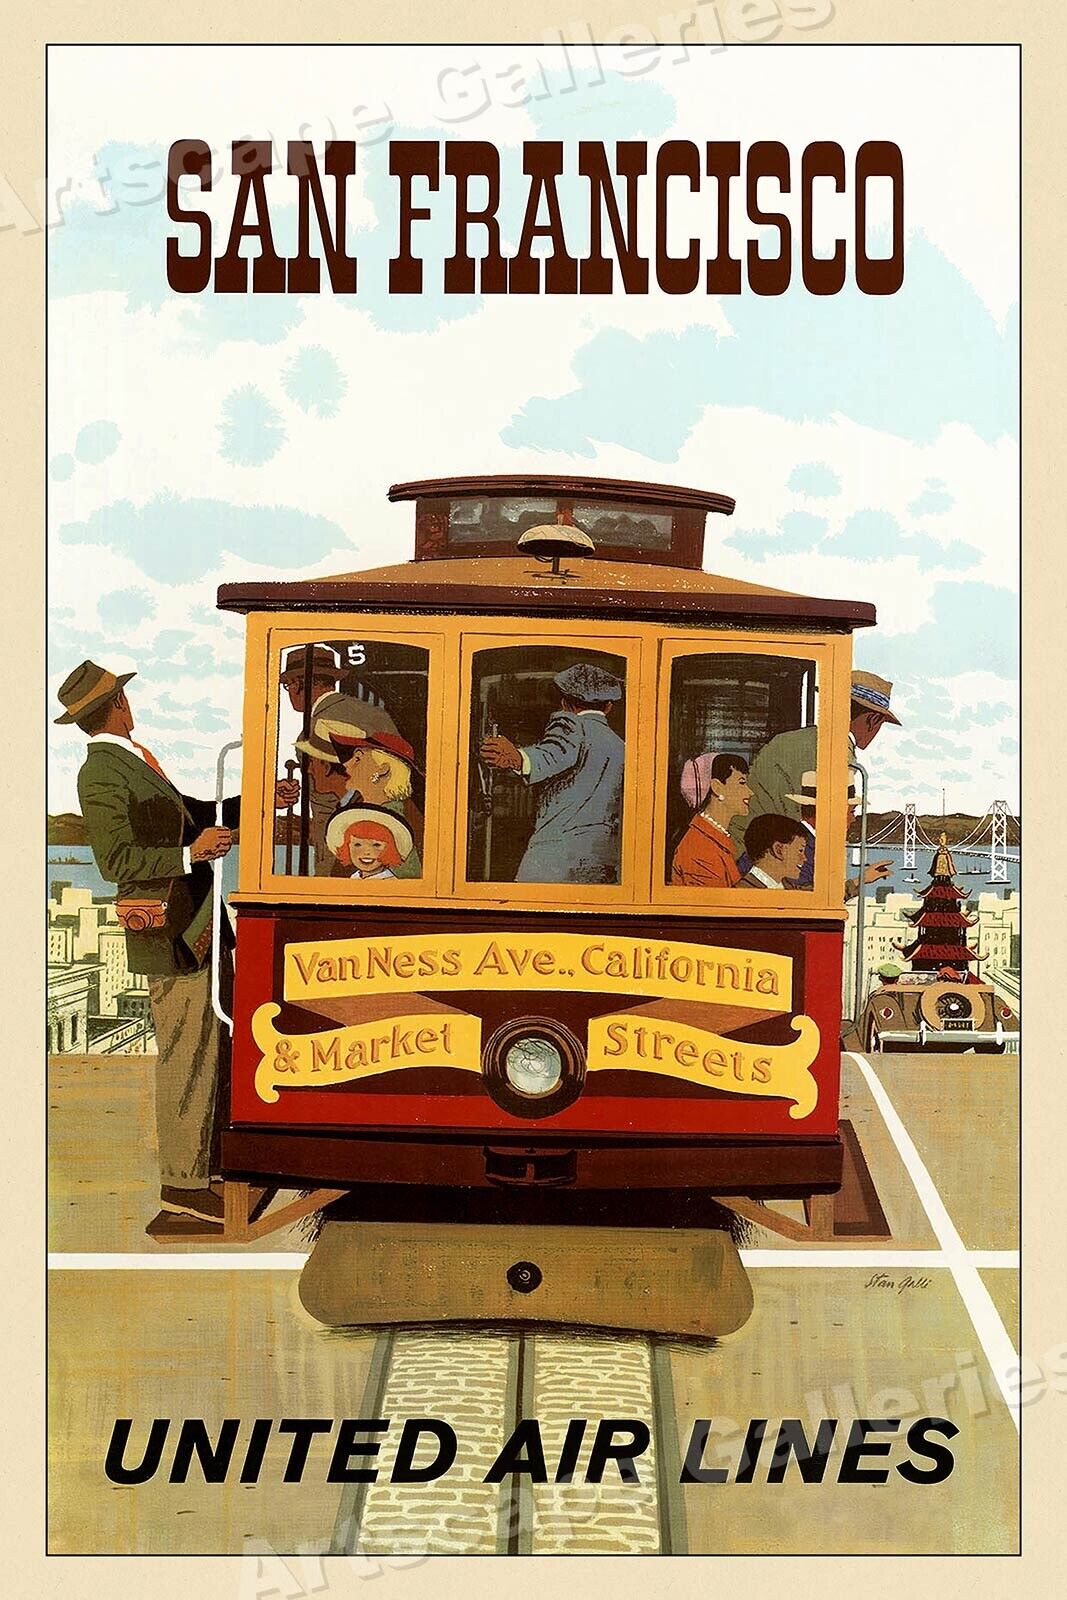 1962 San Francisco Cable Car Vintage Style Travel Poster - 16x24